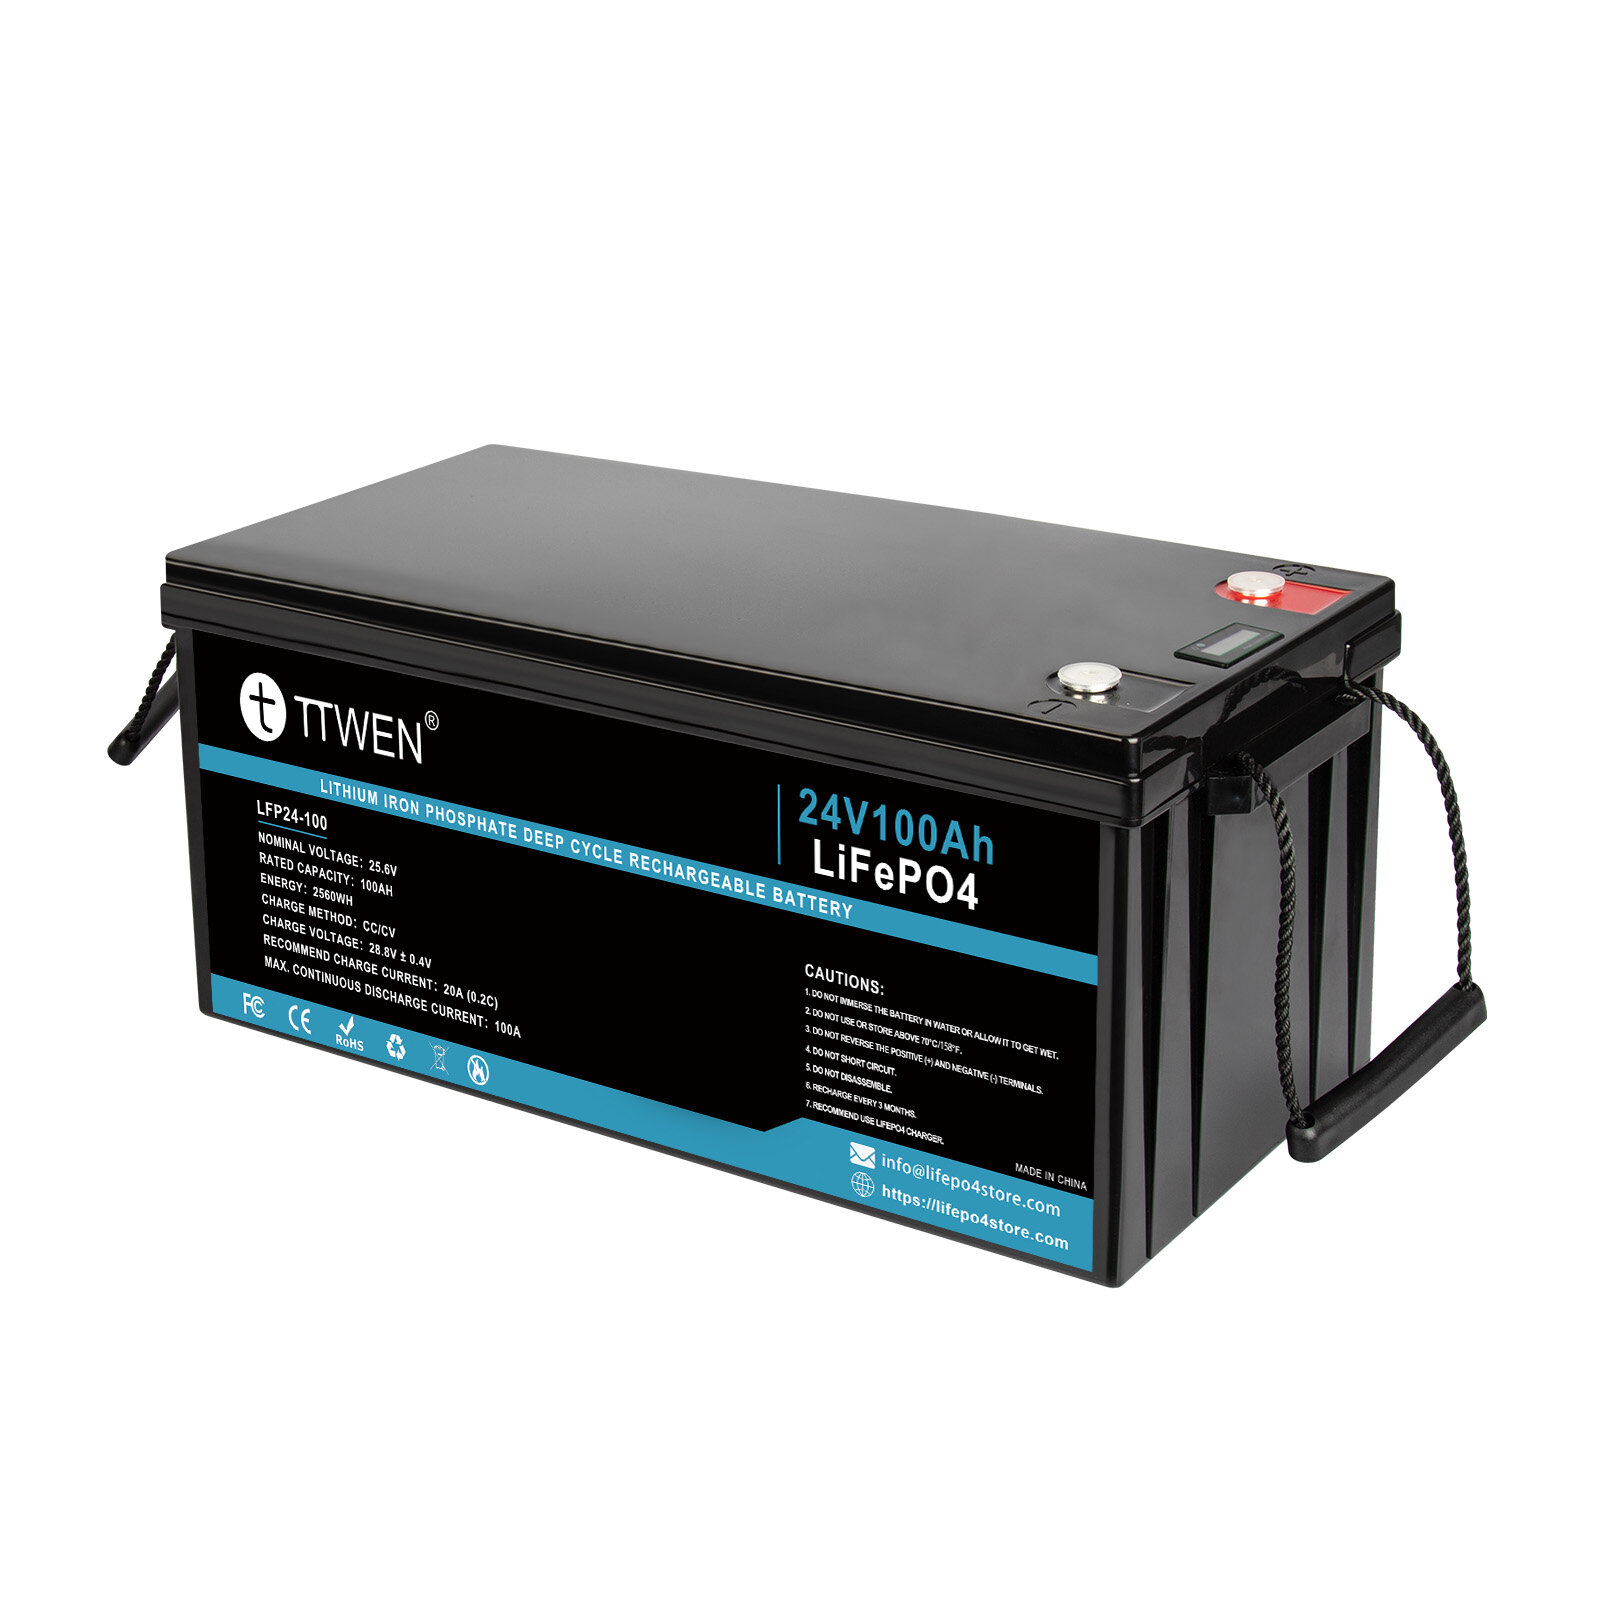 best price,ttwen,24v,25.6v,100ah,lifepo4,battery,pack,2560wh,100a,eu,coupon,price,discount